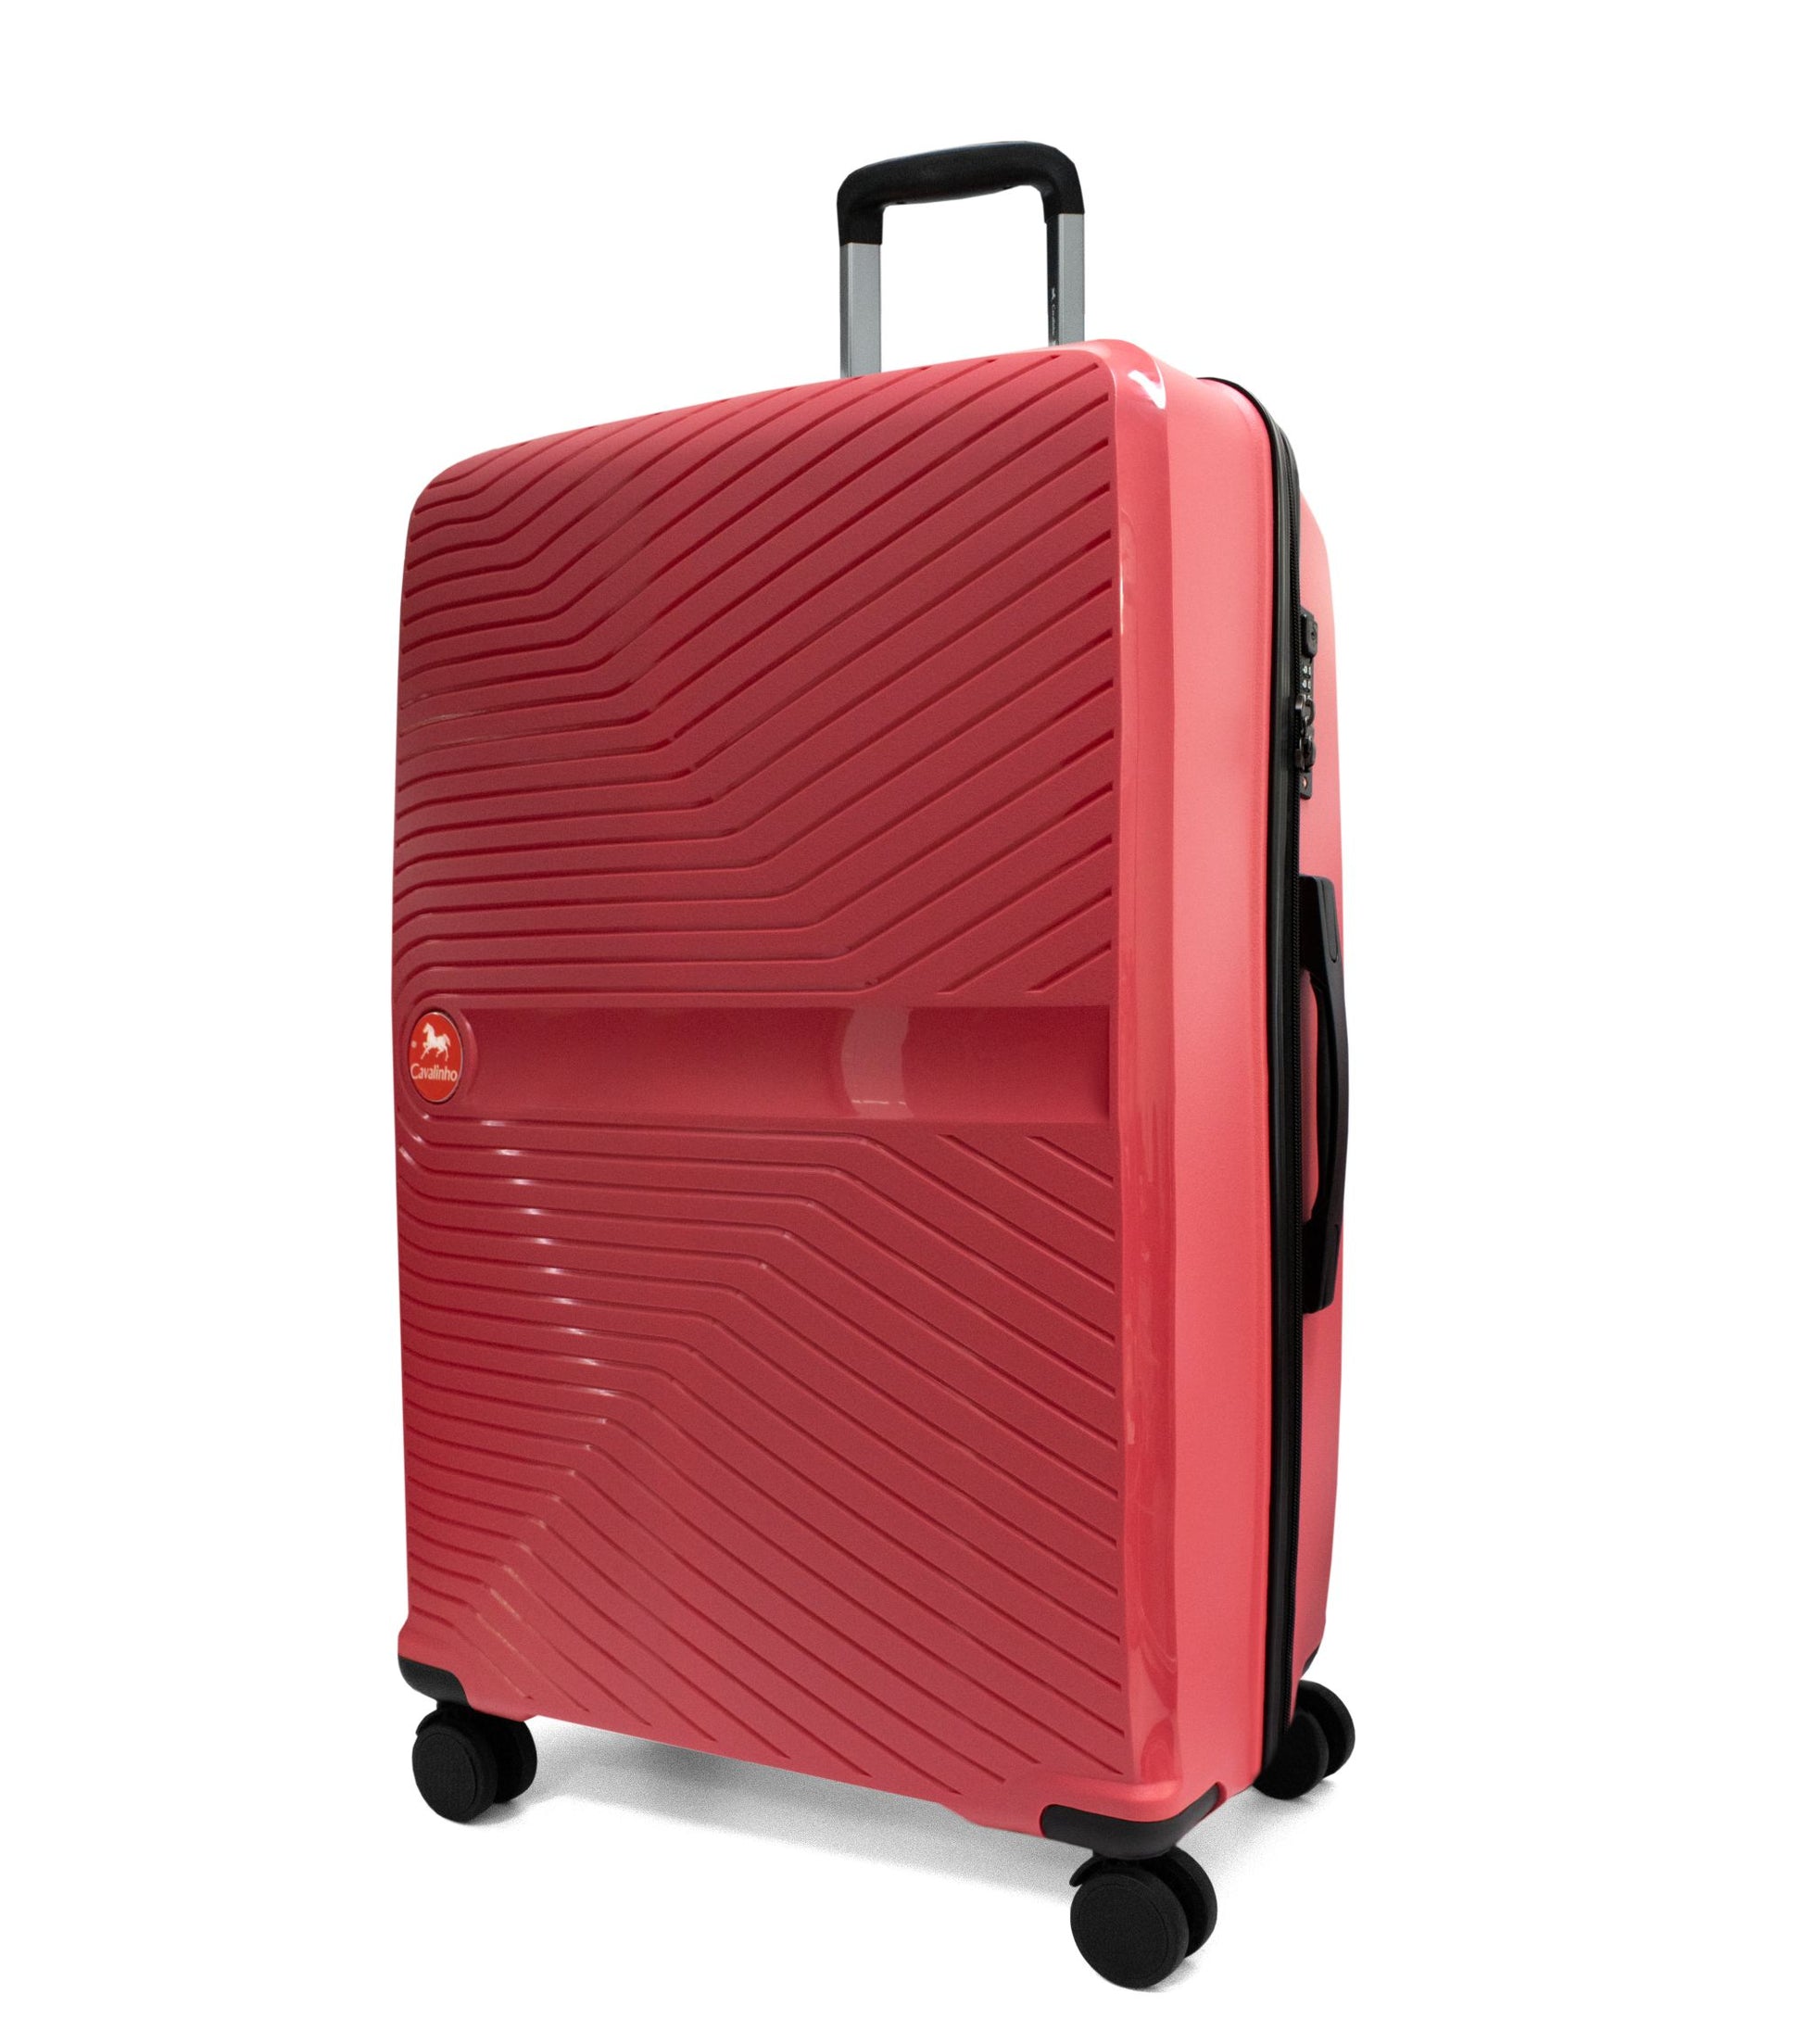 Cavalinho Colorful Check-in Hardside Luggage (28") - 28 inch Coral - 68020004.27.28_2